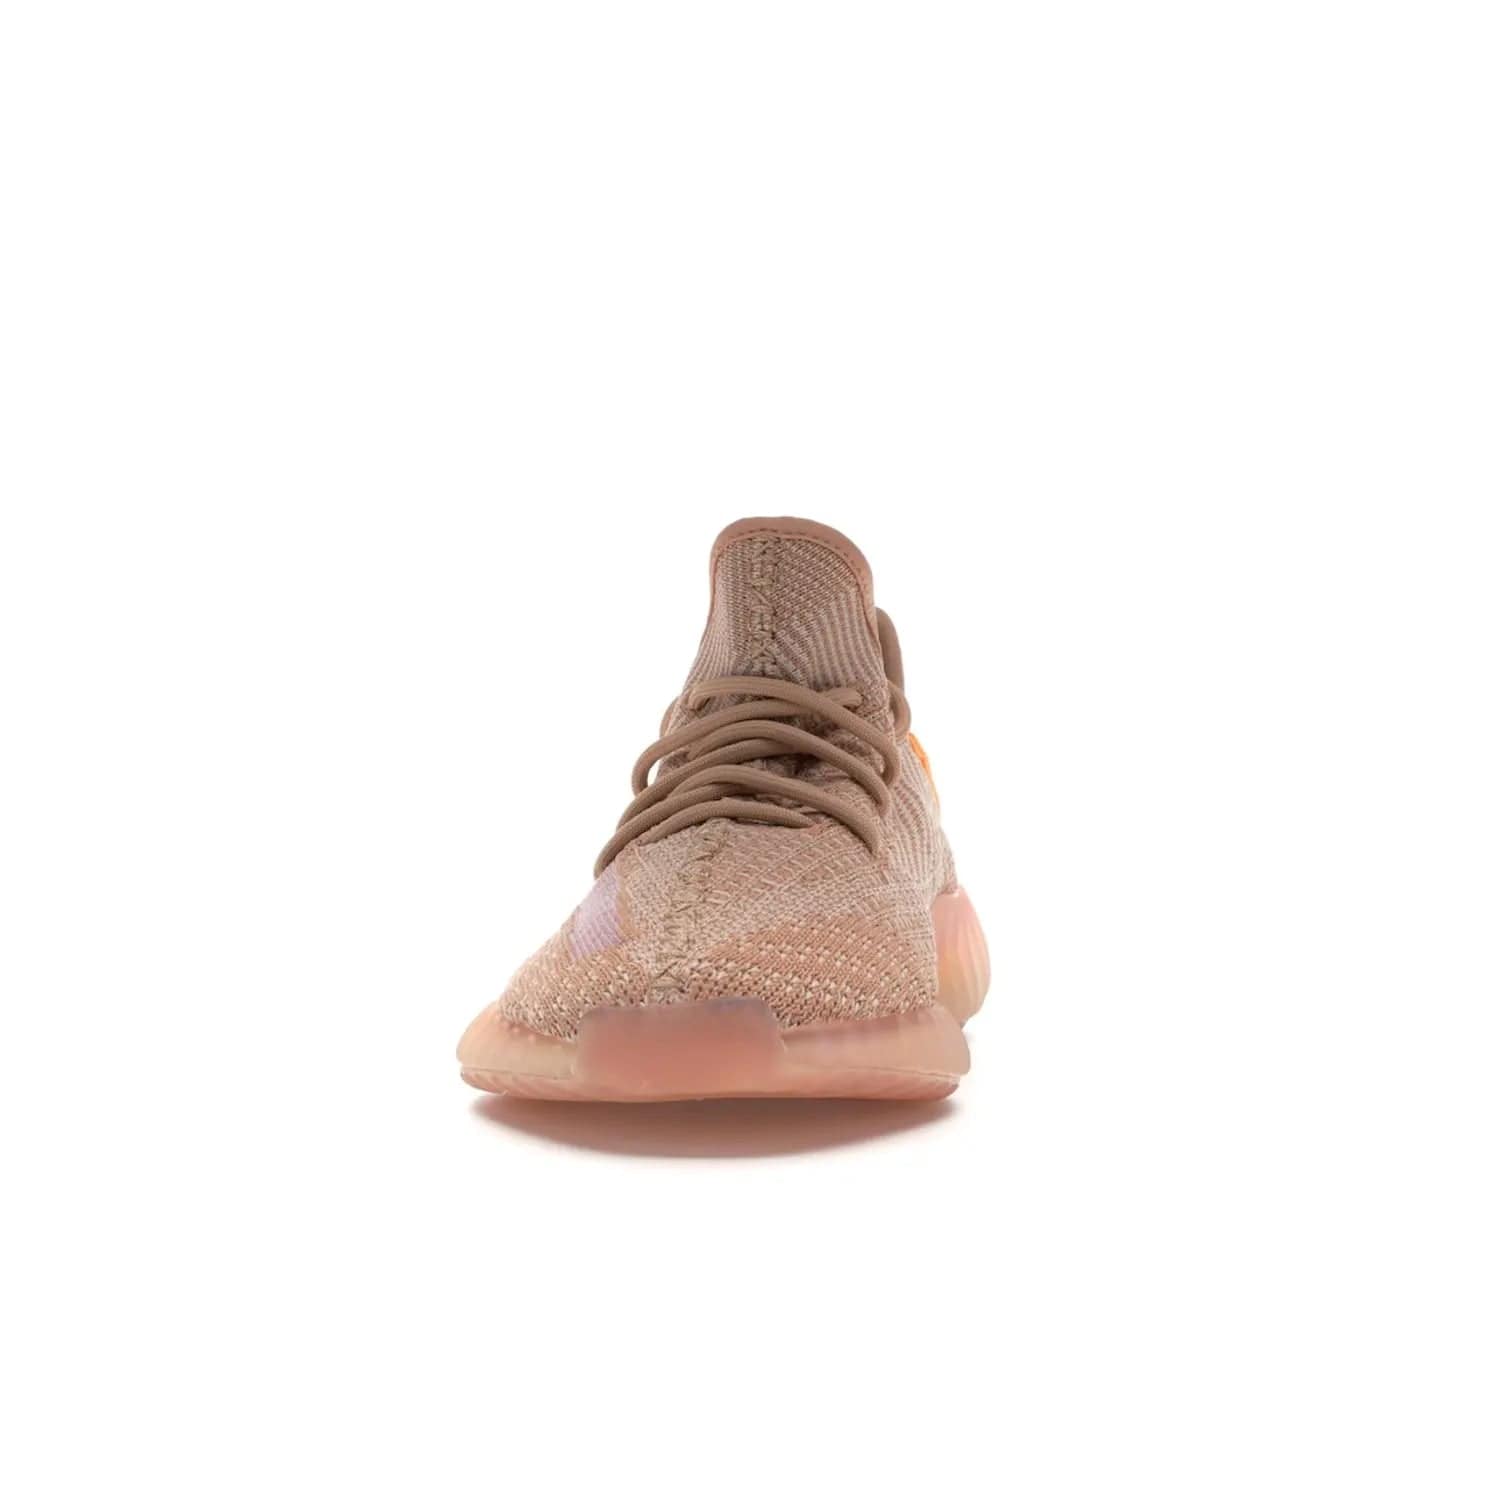 adidas Yeezy Boost 350 V2 Clay - Image 11 - Only at www.BallersClubKickz.com - The adidas Yeezy Boost 350 V2 Clay - style and swag in one shoe. Orange accents, clay midsole and sole. Get yours today!